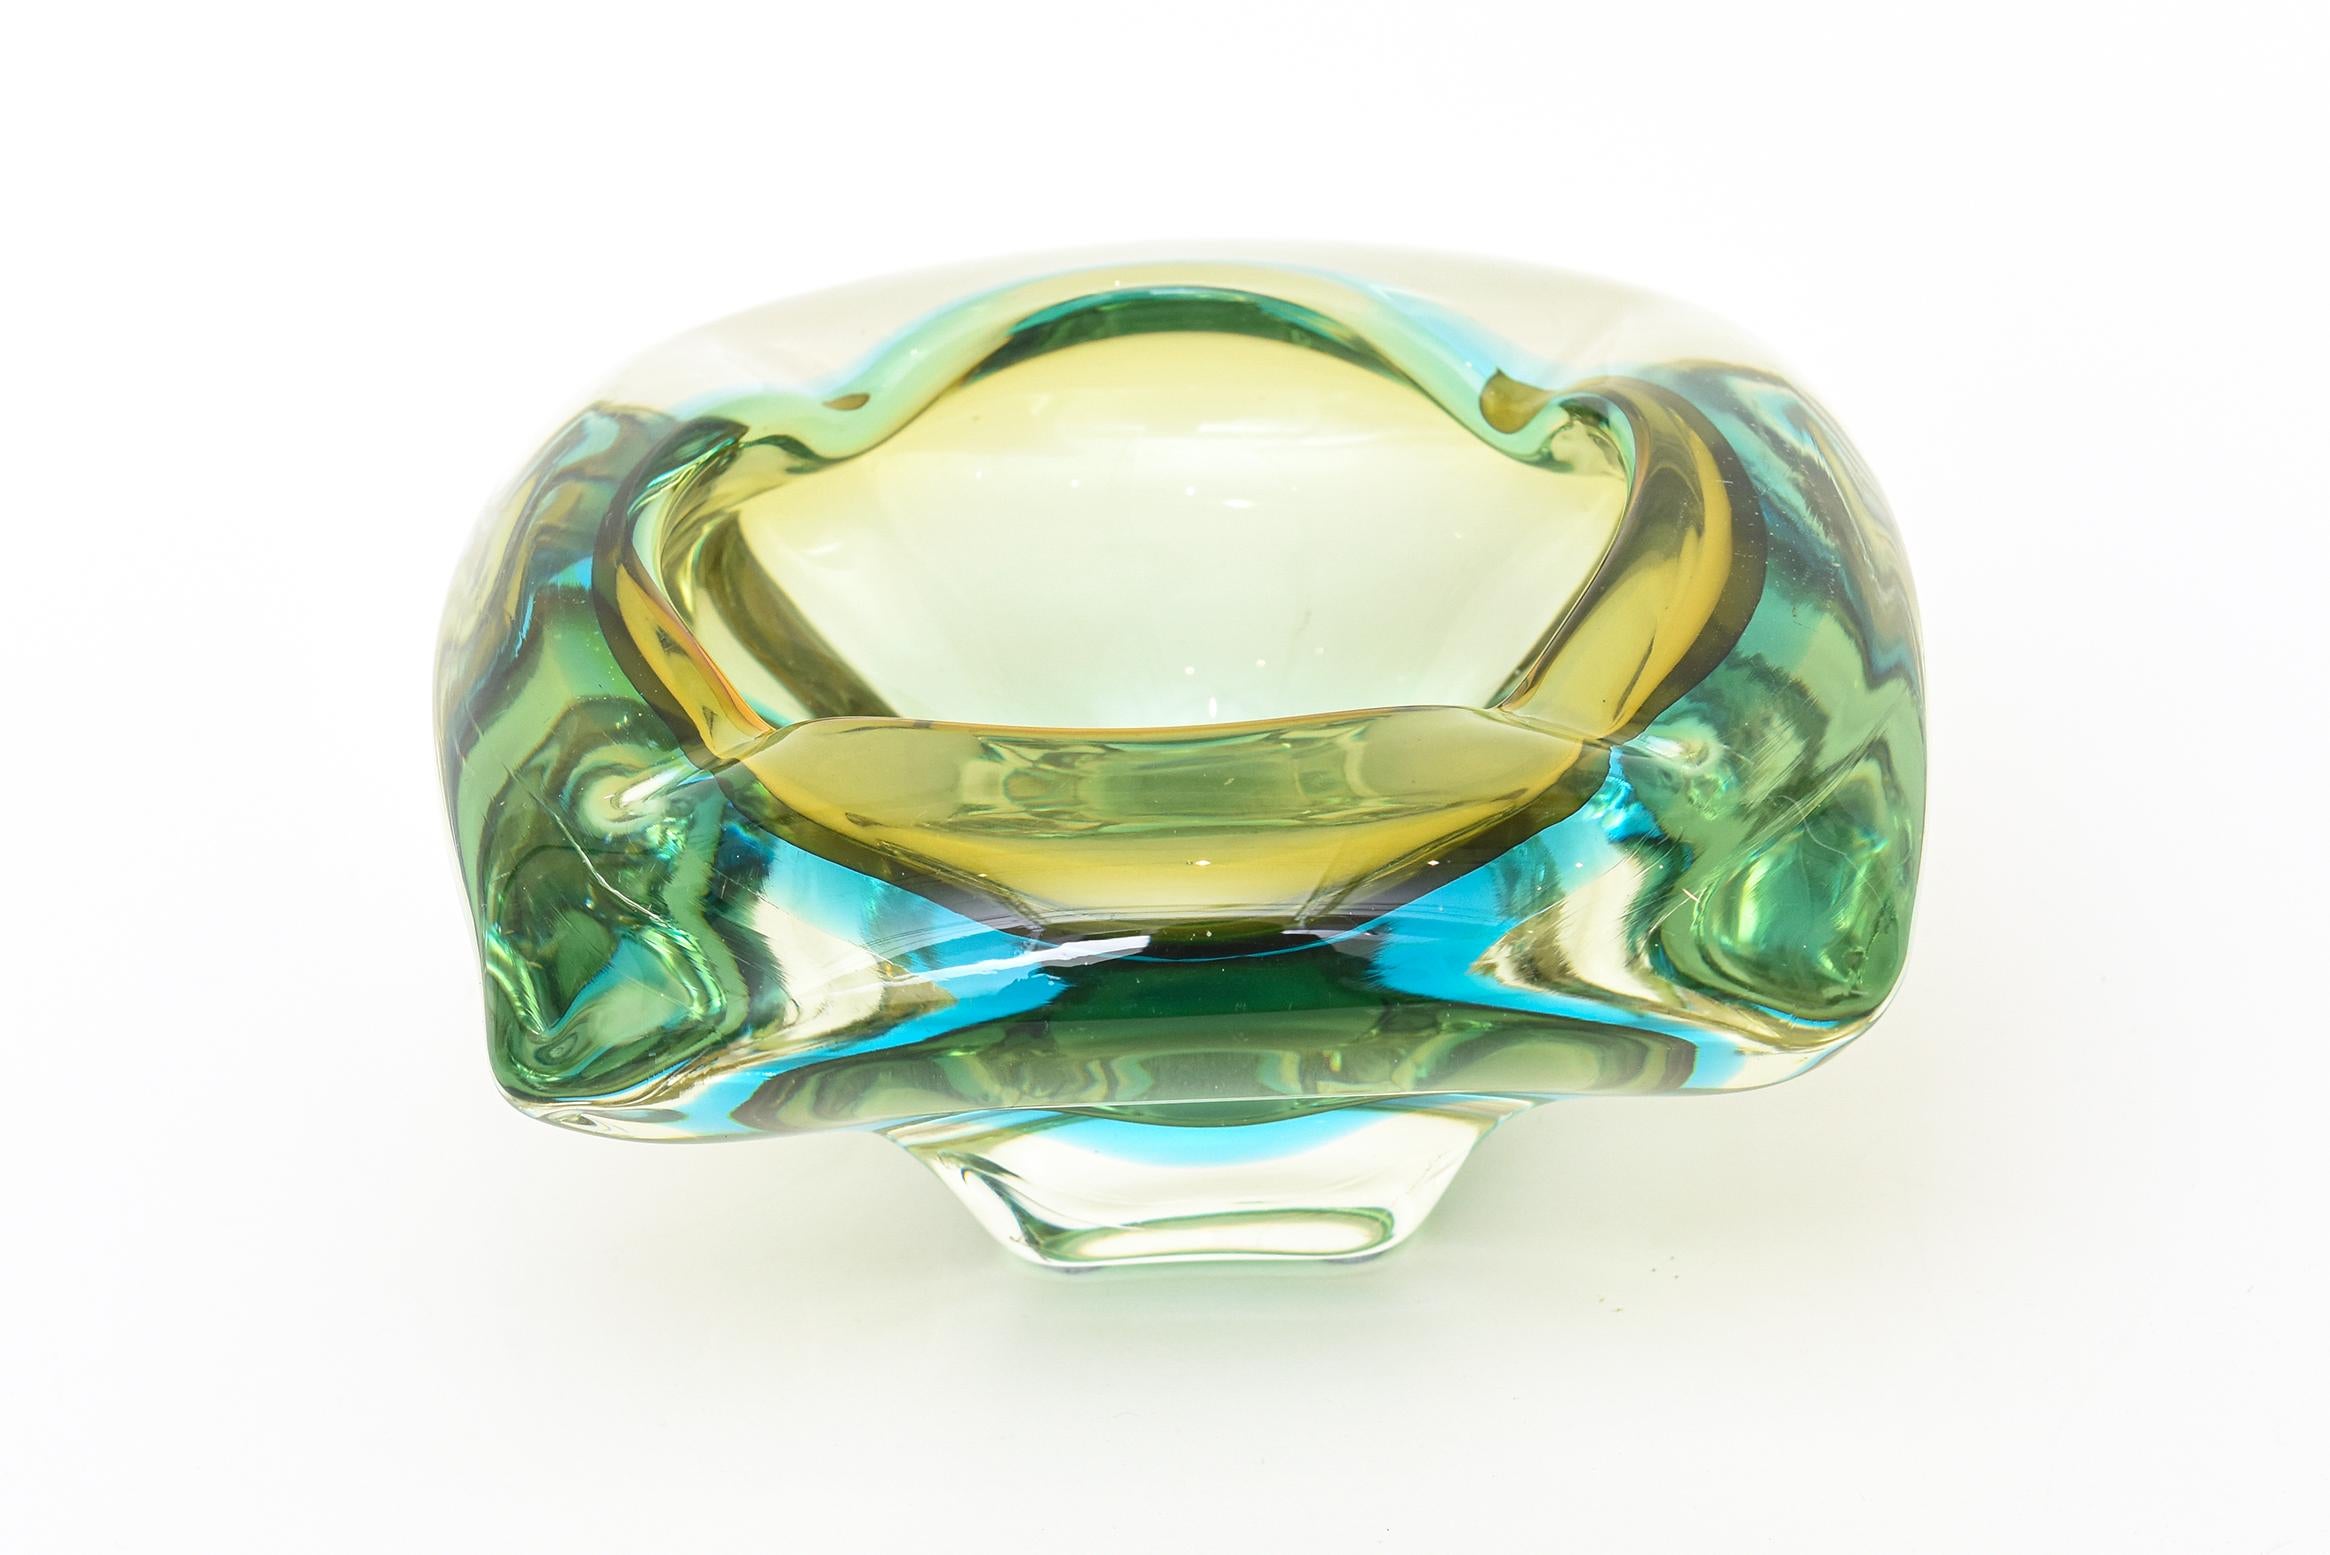 Flavio Poli Vintage Murano Sommerso Turquoise and Green Glass Bowl Or Ashtray For Sale 1